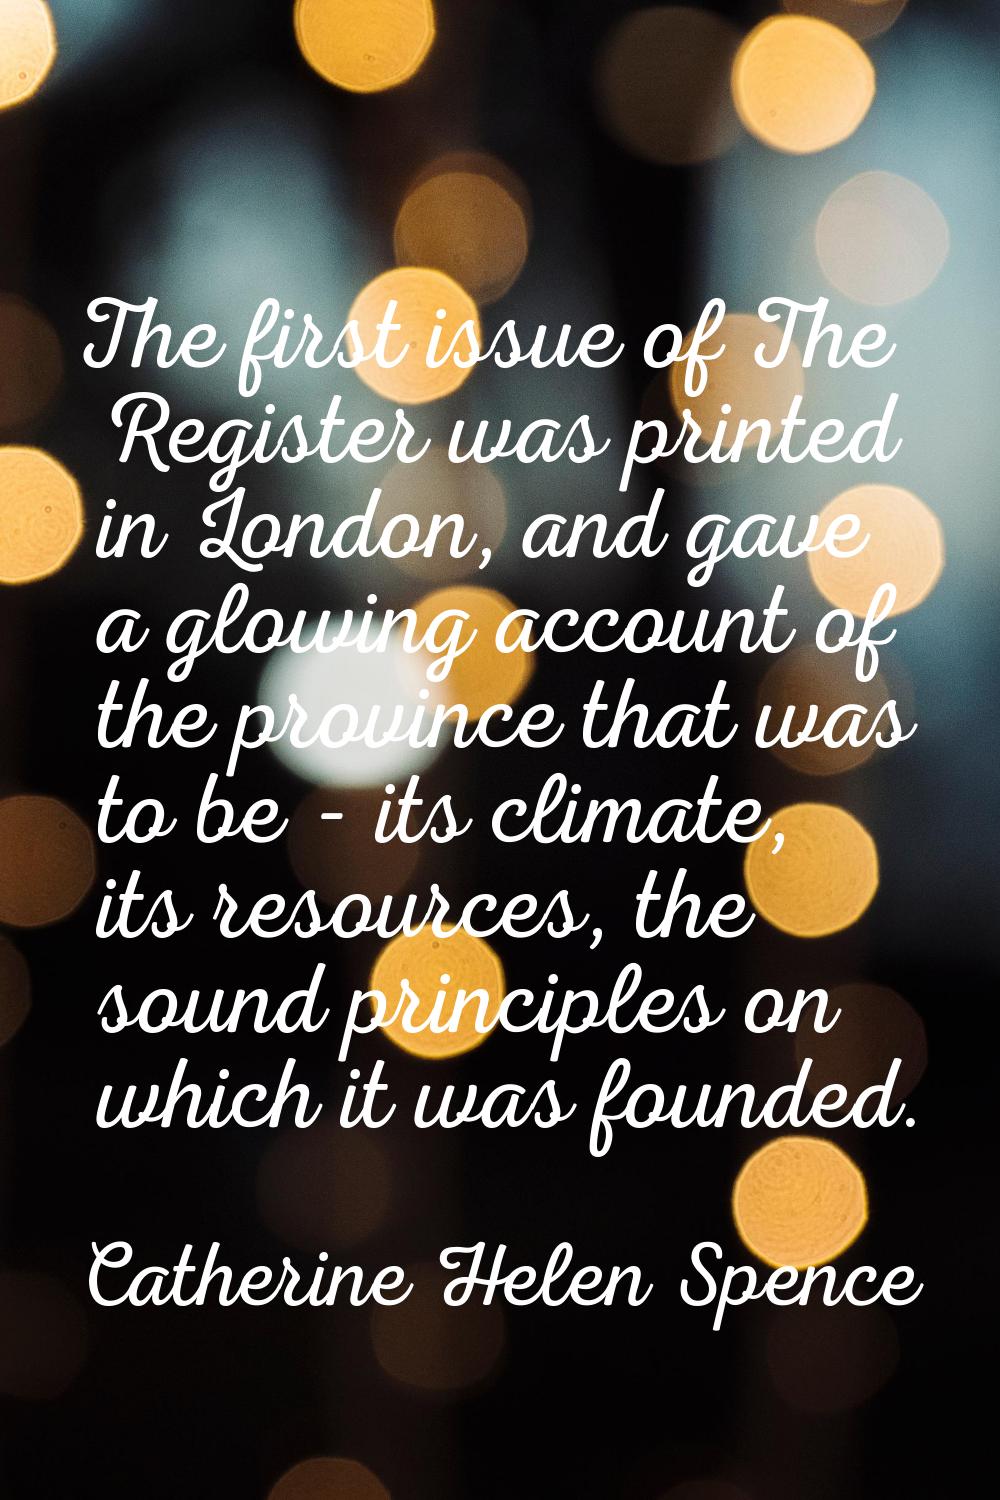 The first issue of The Register was printed in London, and gave a glowing account of the province t